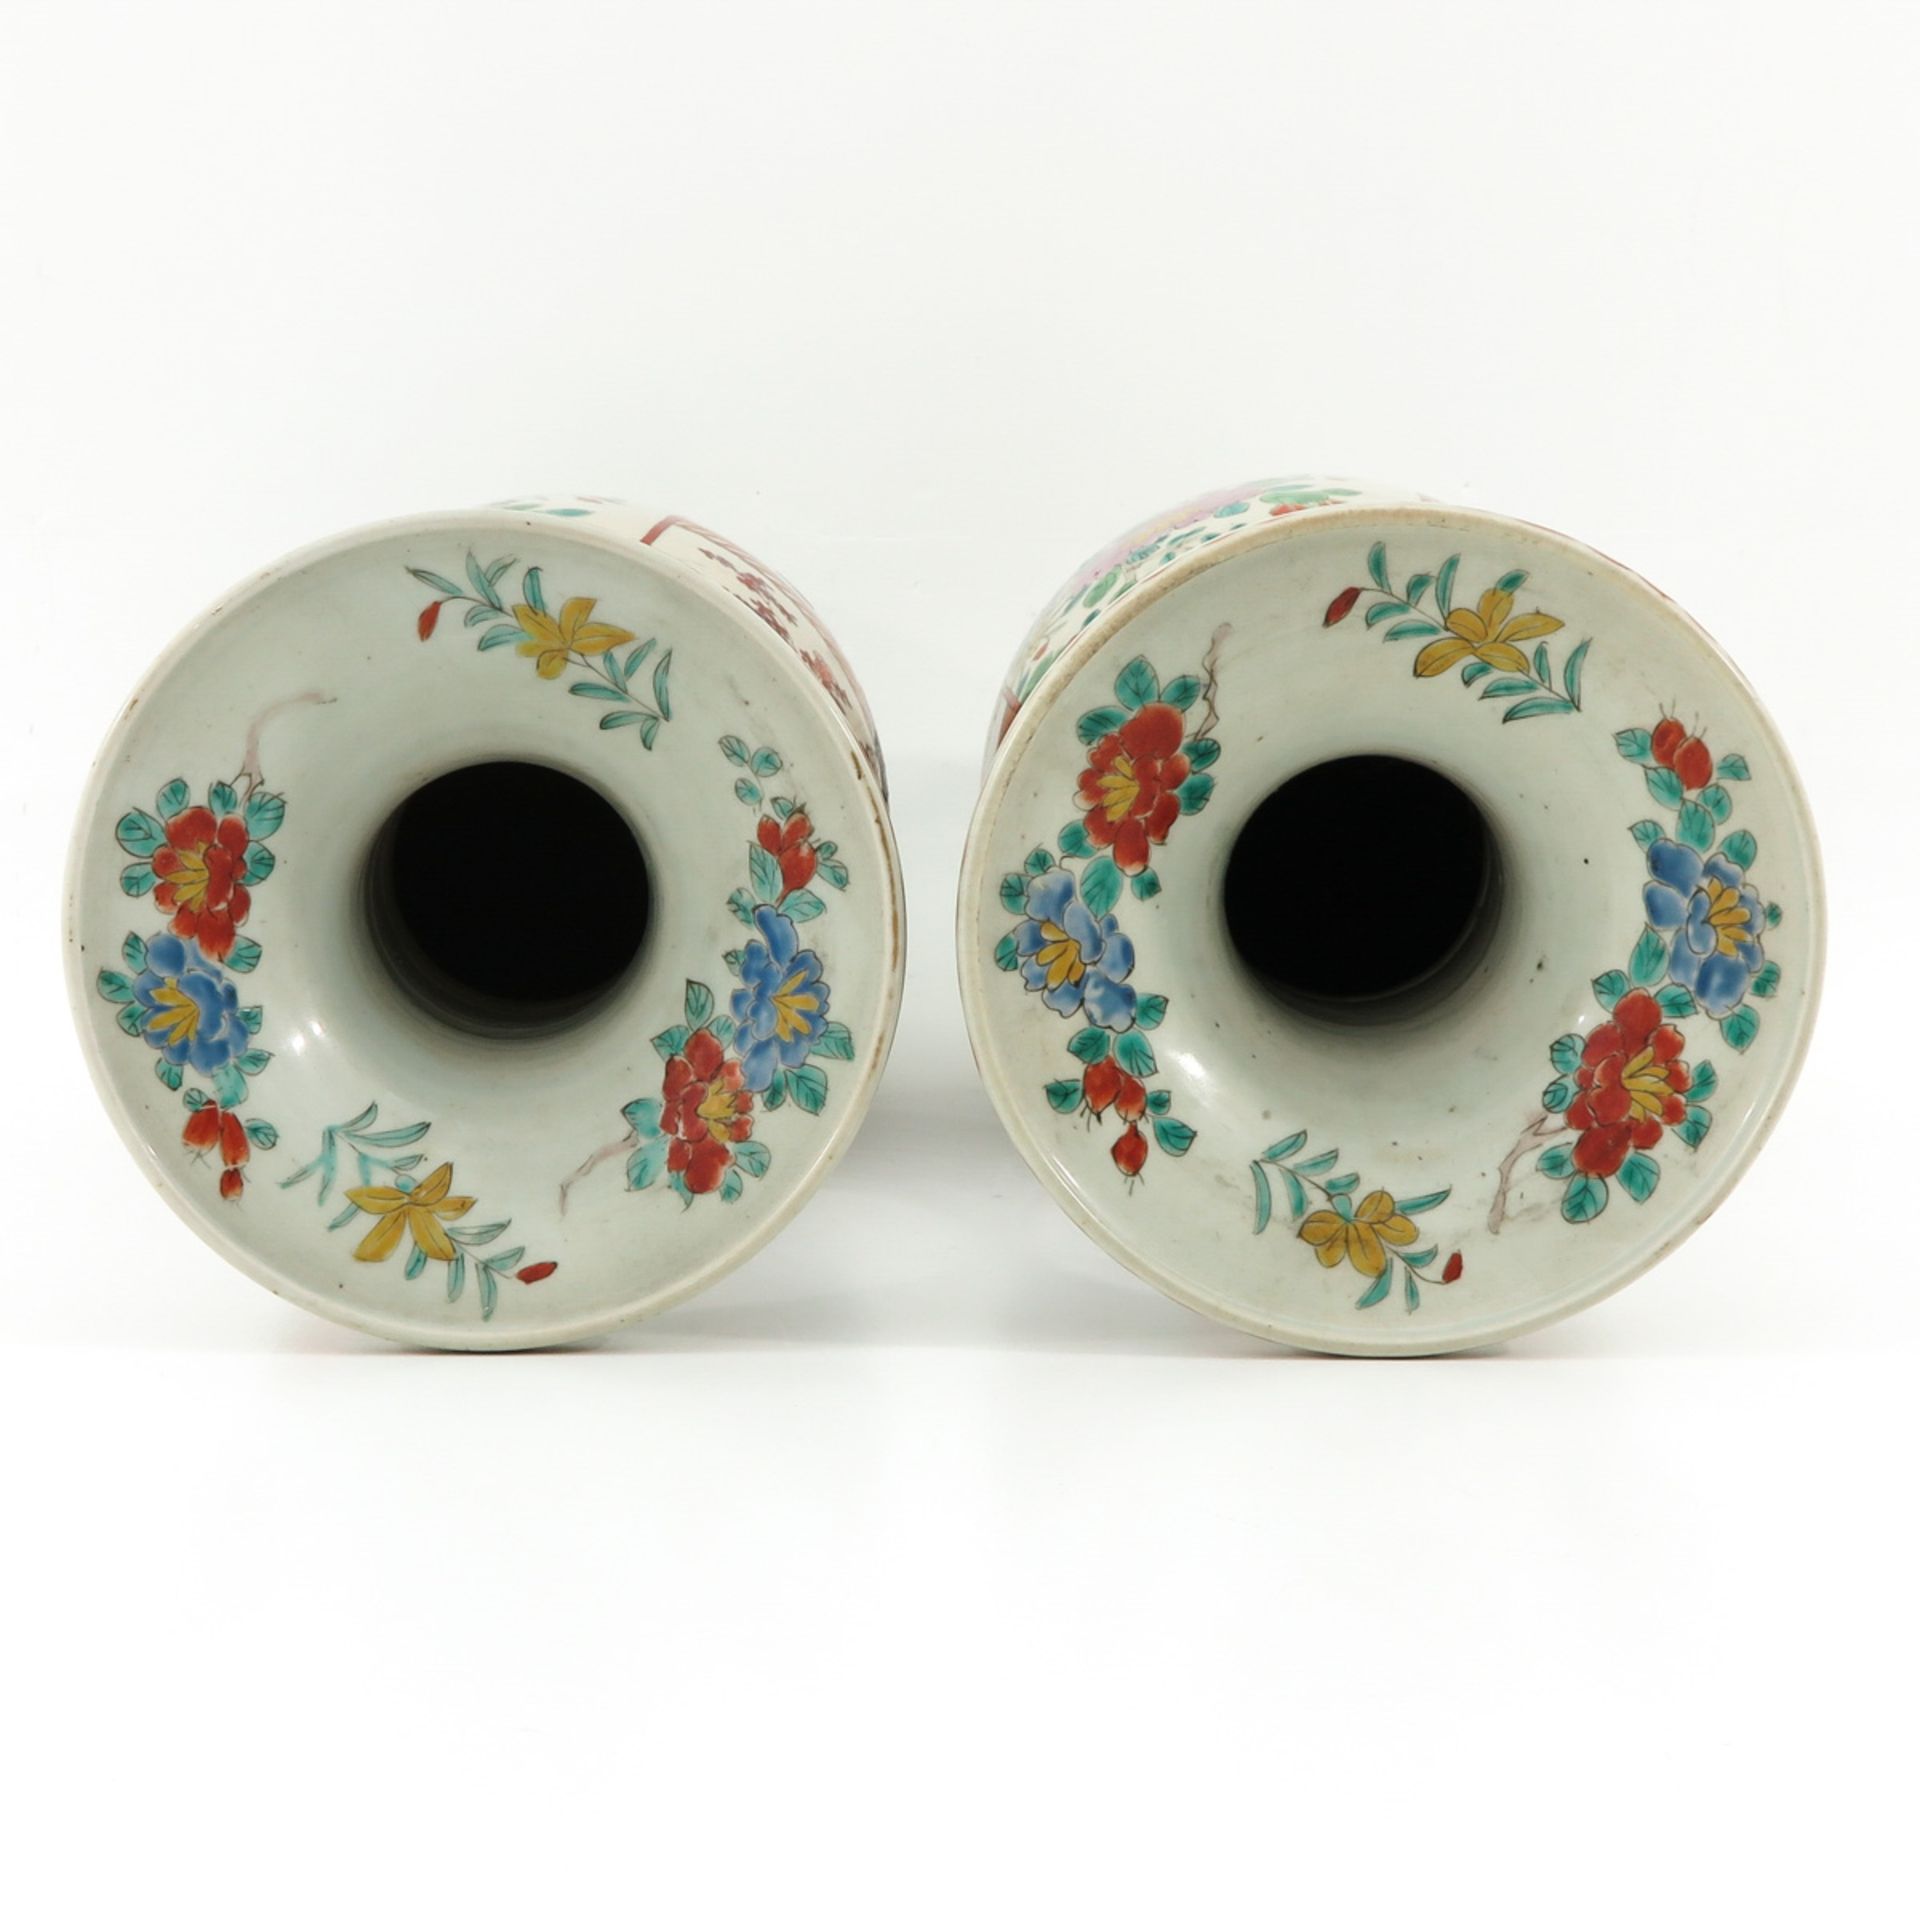 A Pair of Japanese Vases - Image 5 of 10